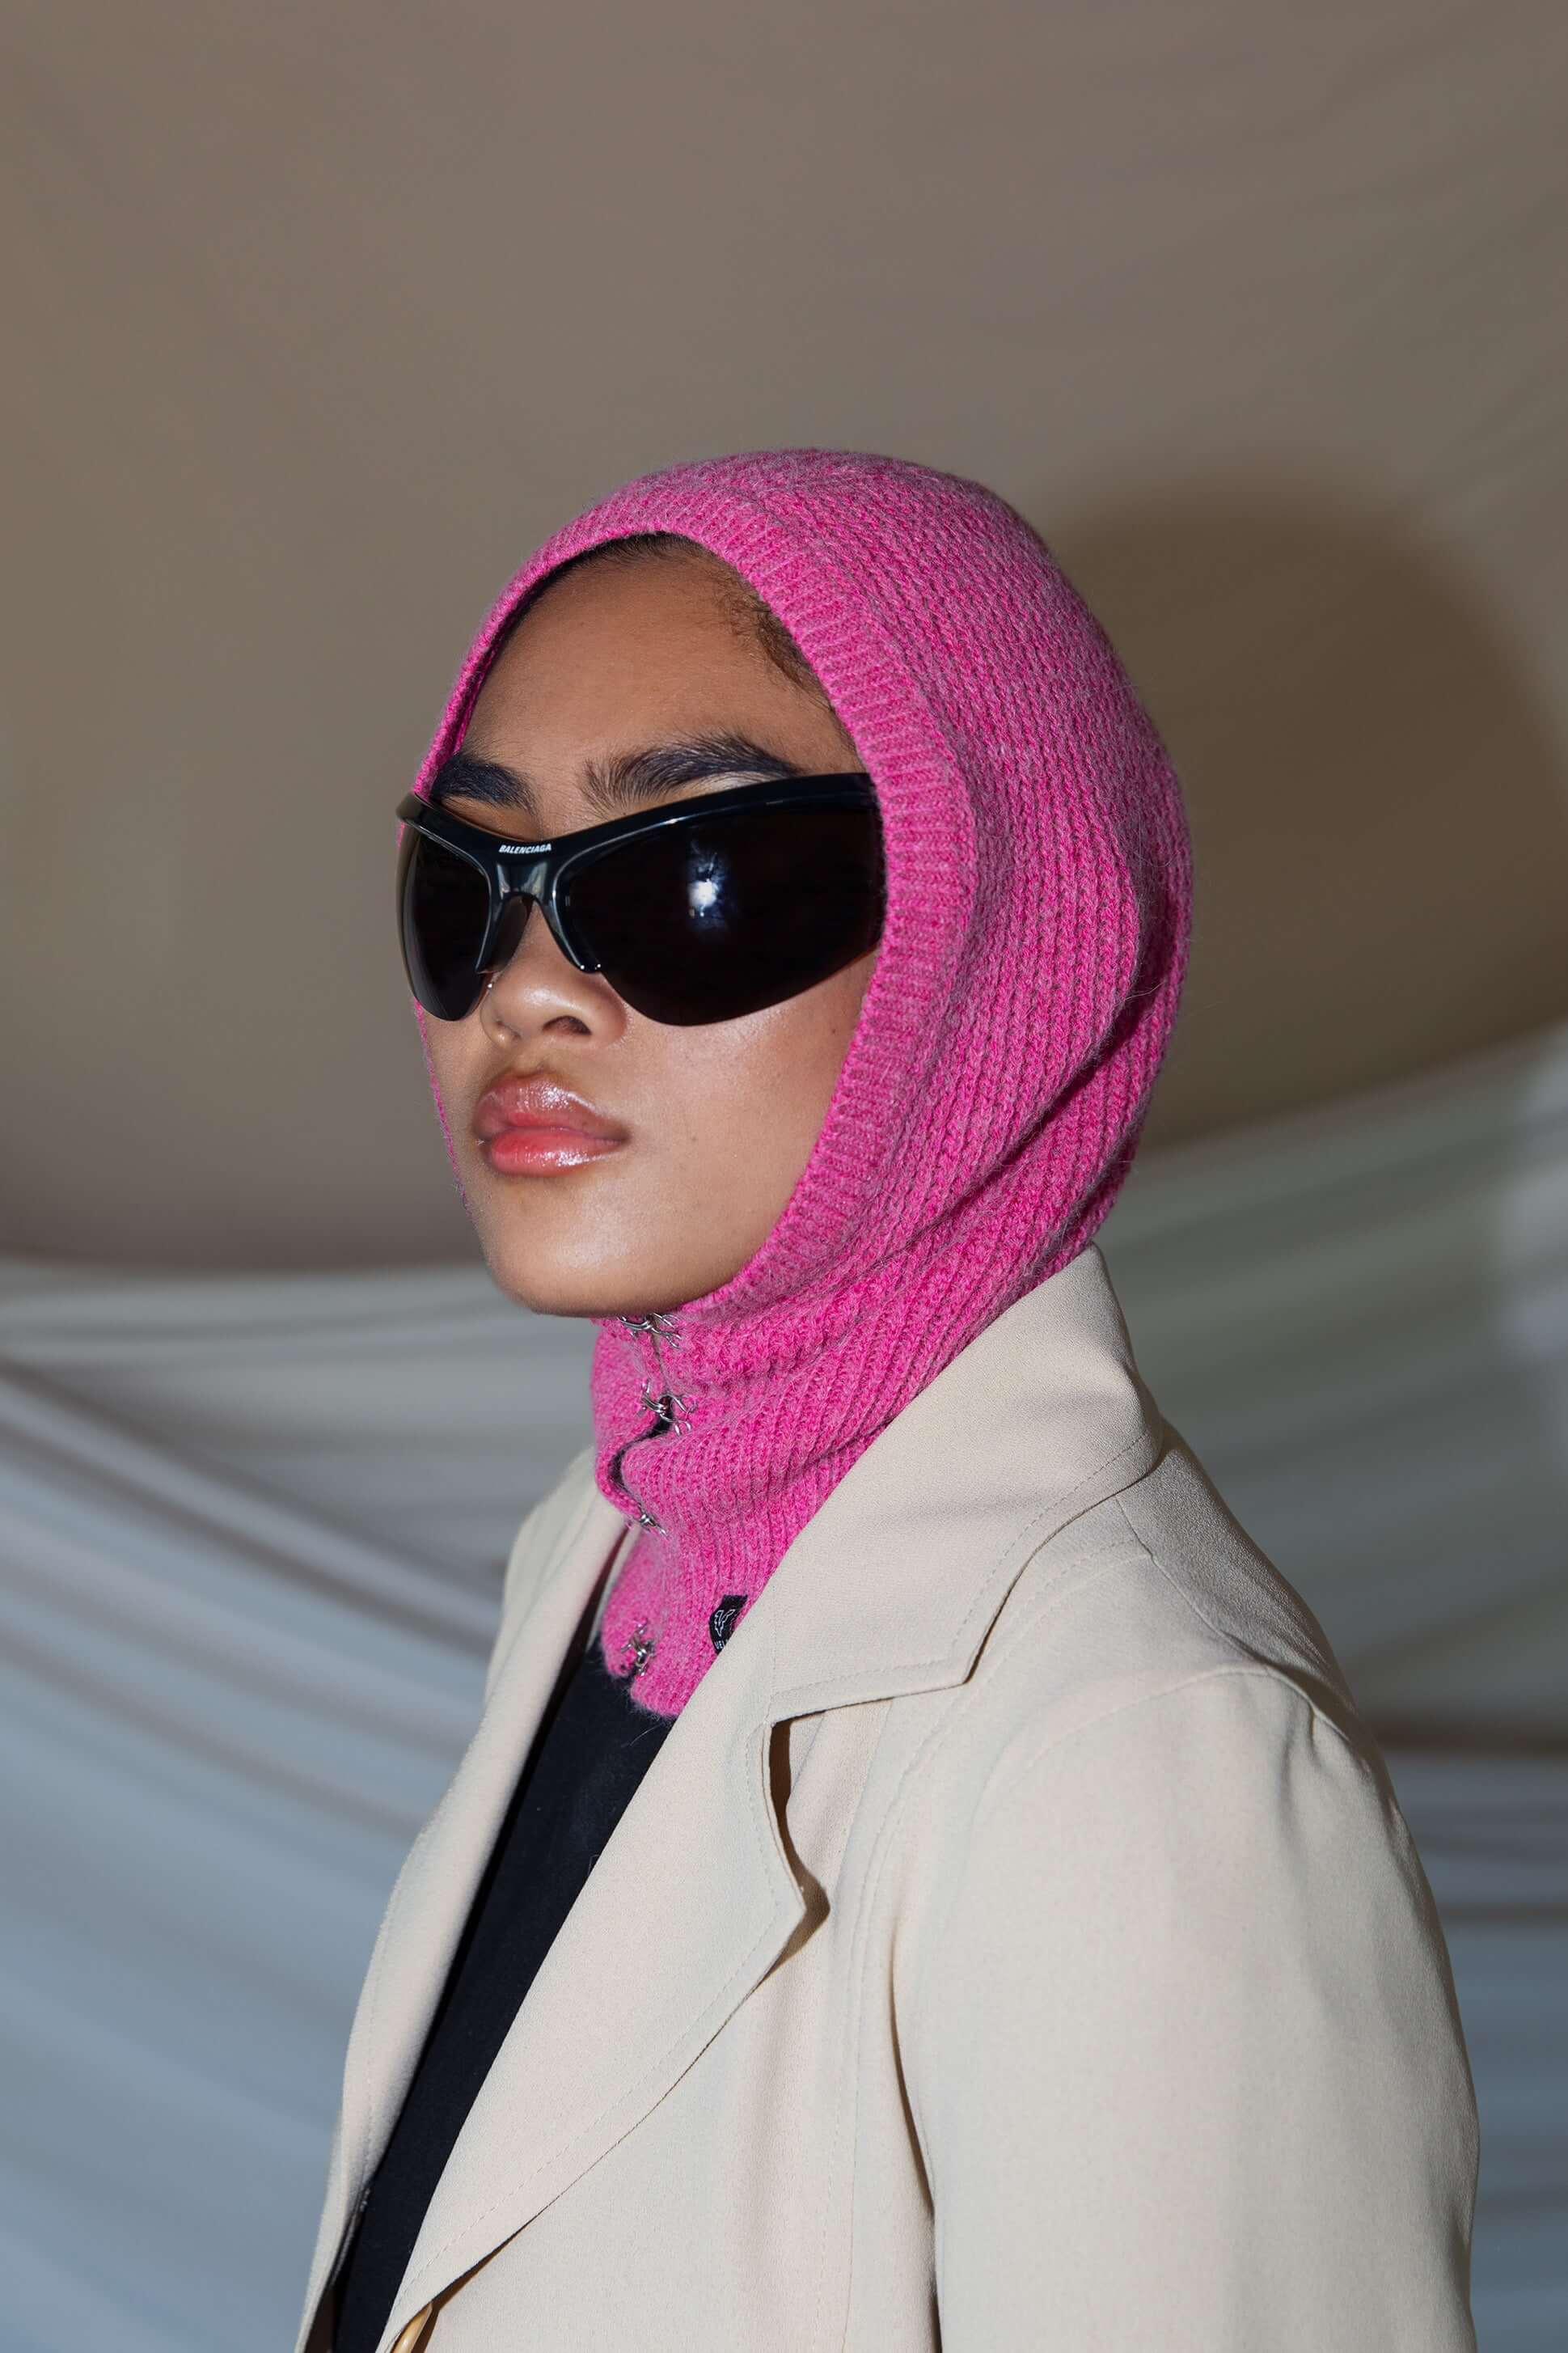 Balaclavas Are Trendy, but for Some Muslim Women It's More Complicated -  The New York Times